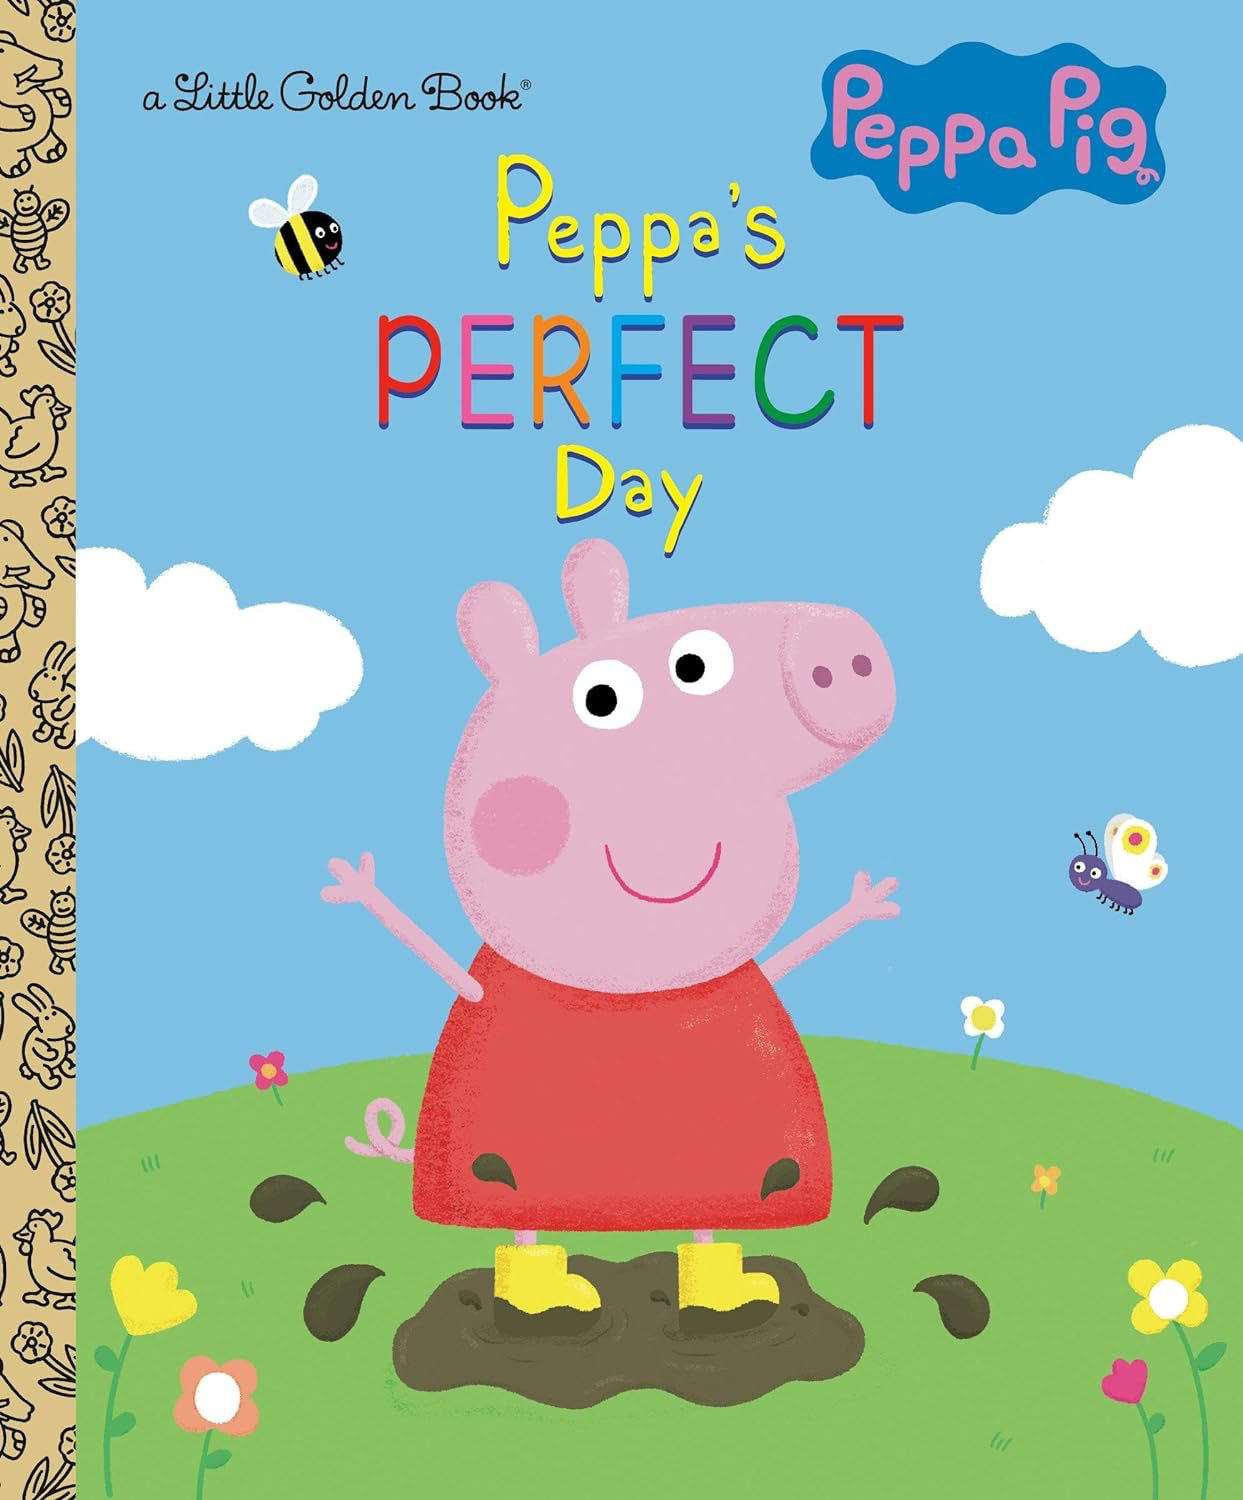 "Peppa's Perfect Day" Little Golden Book